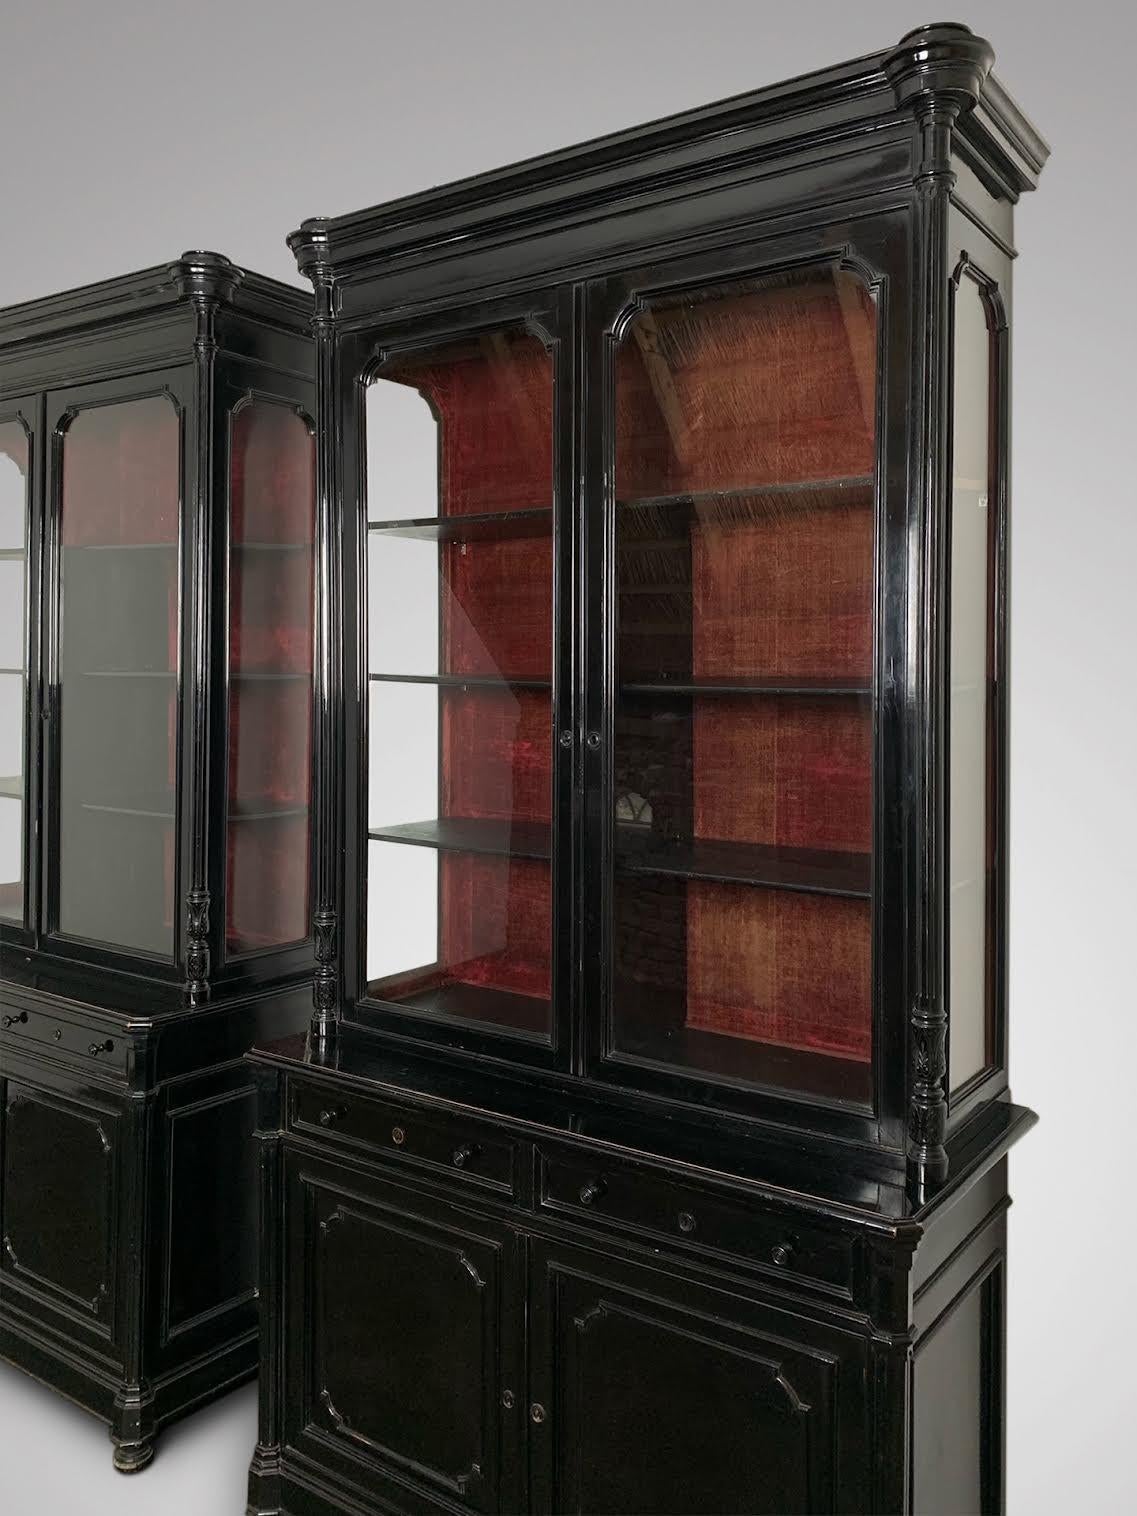 Regency Pair of Impressive 19th Century French Ebonized Cabinets or Bookcases